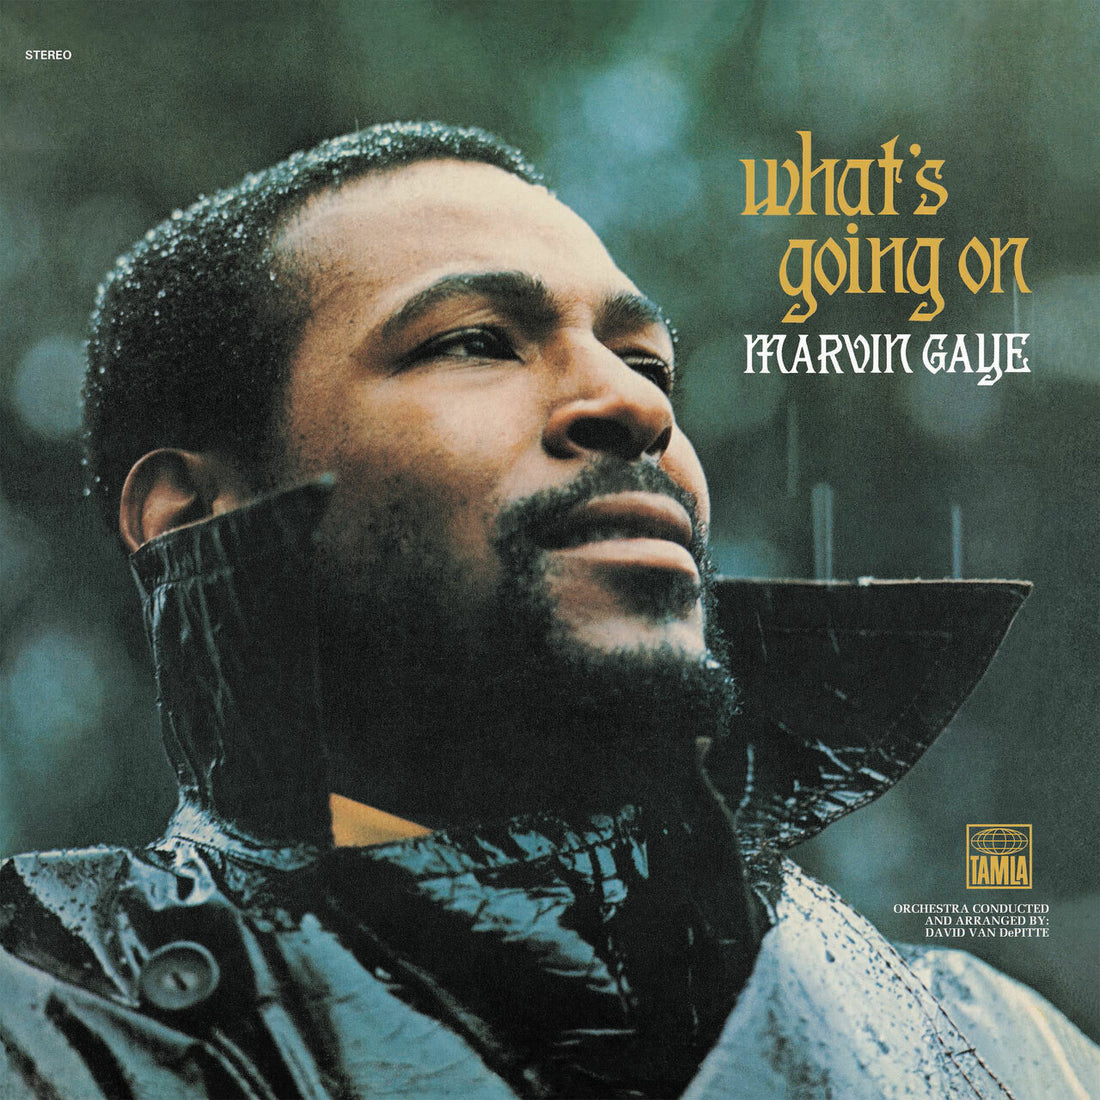 Marvin Gaye | What&